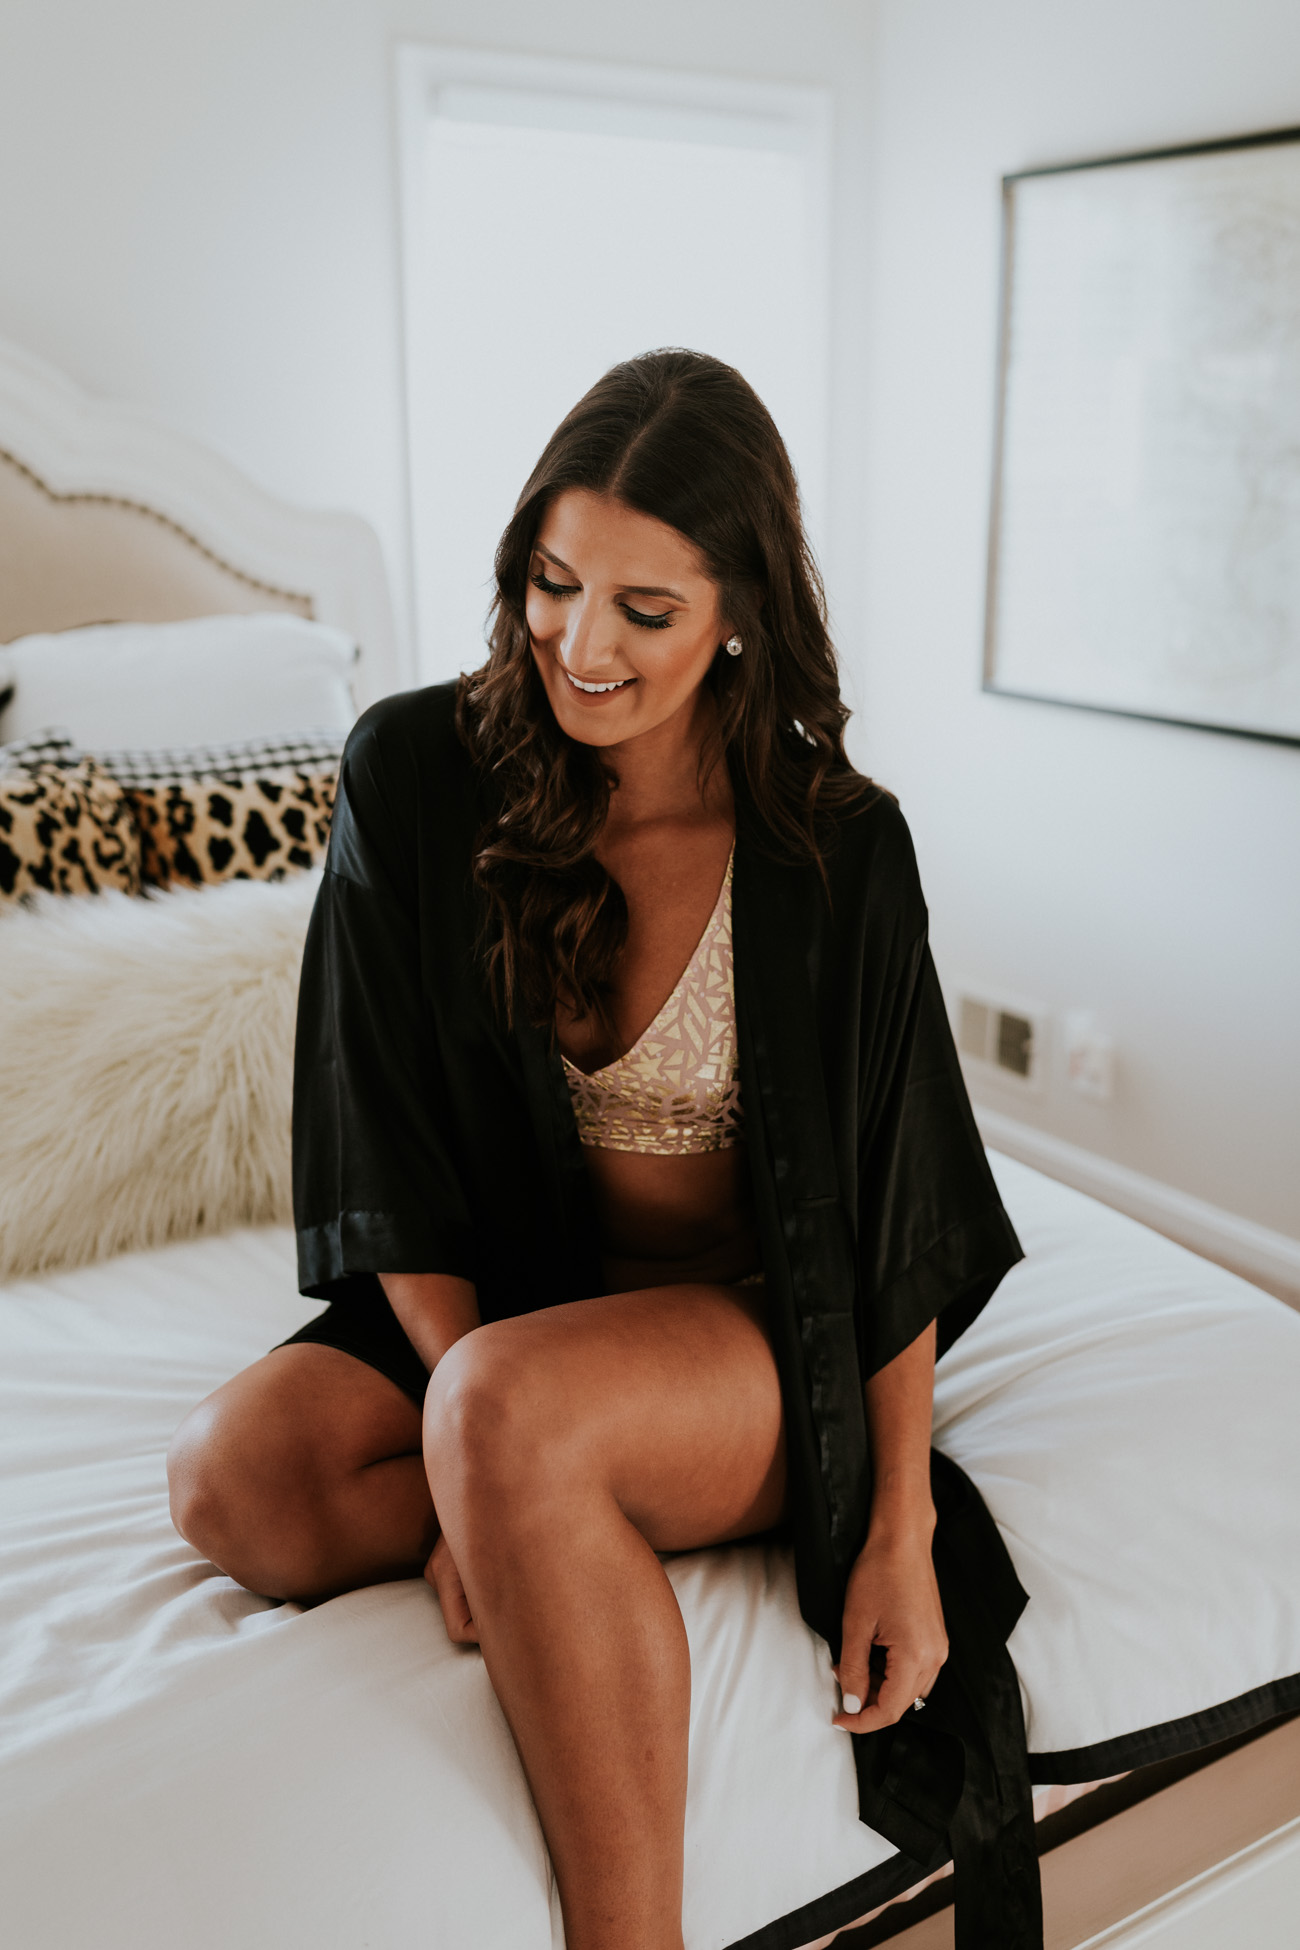 holiday lingerie, nordstrom lingerie, free people lingerie, free people bra, free people intimates, fp intimates, kate spade robe // grace wainwright a southern drawl